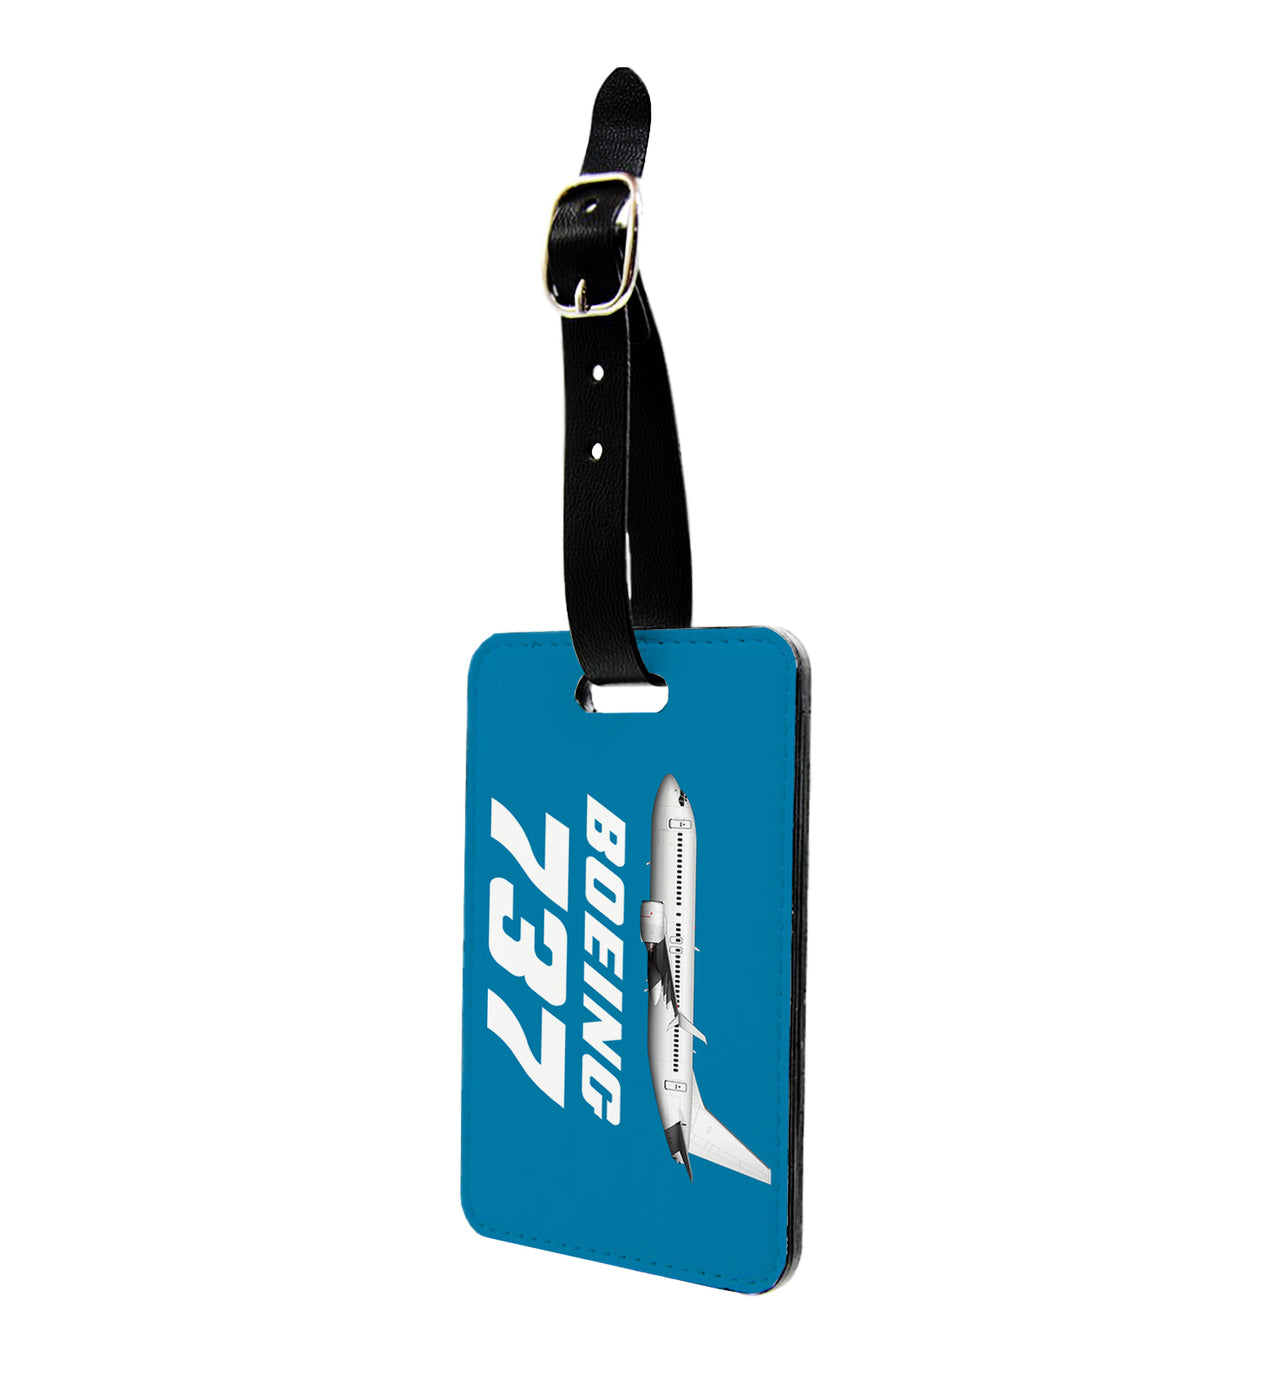 The Boeing 737 Designed Luggage Tag